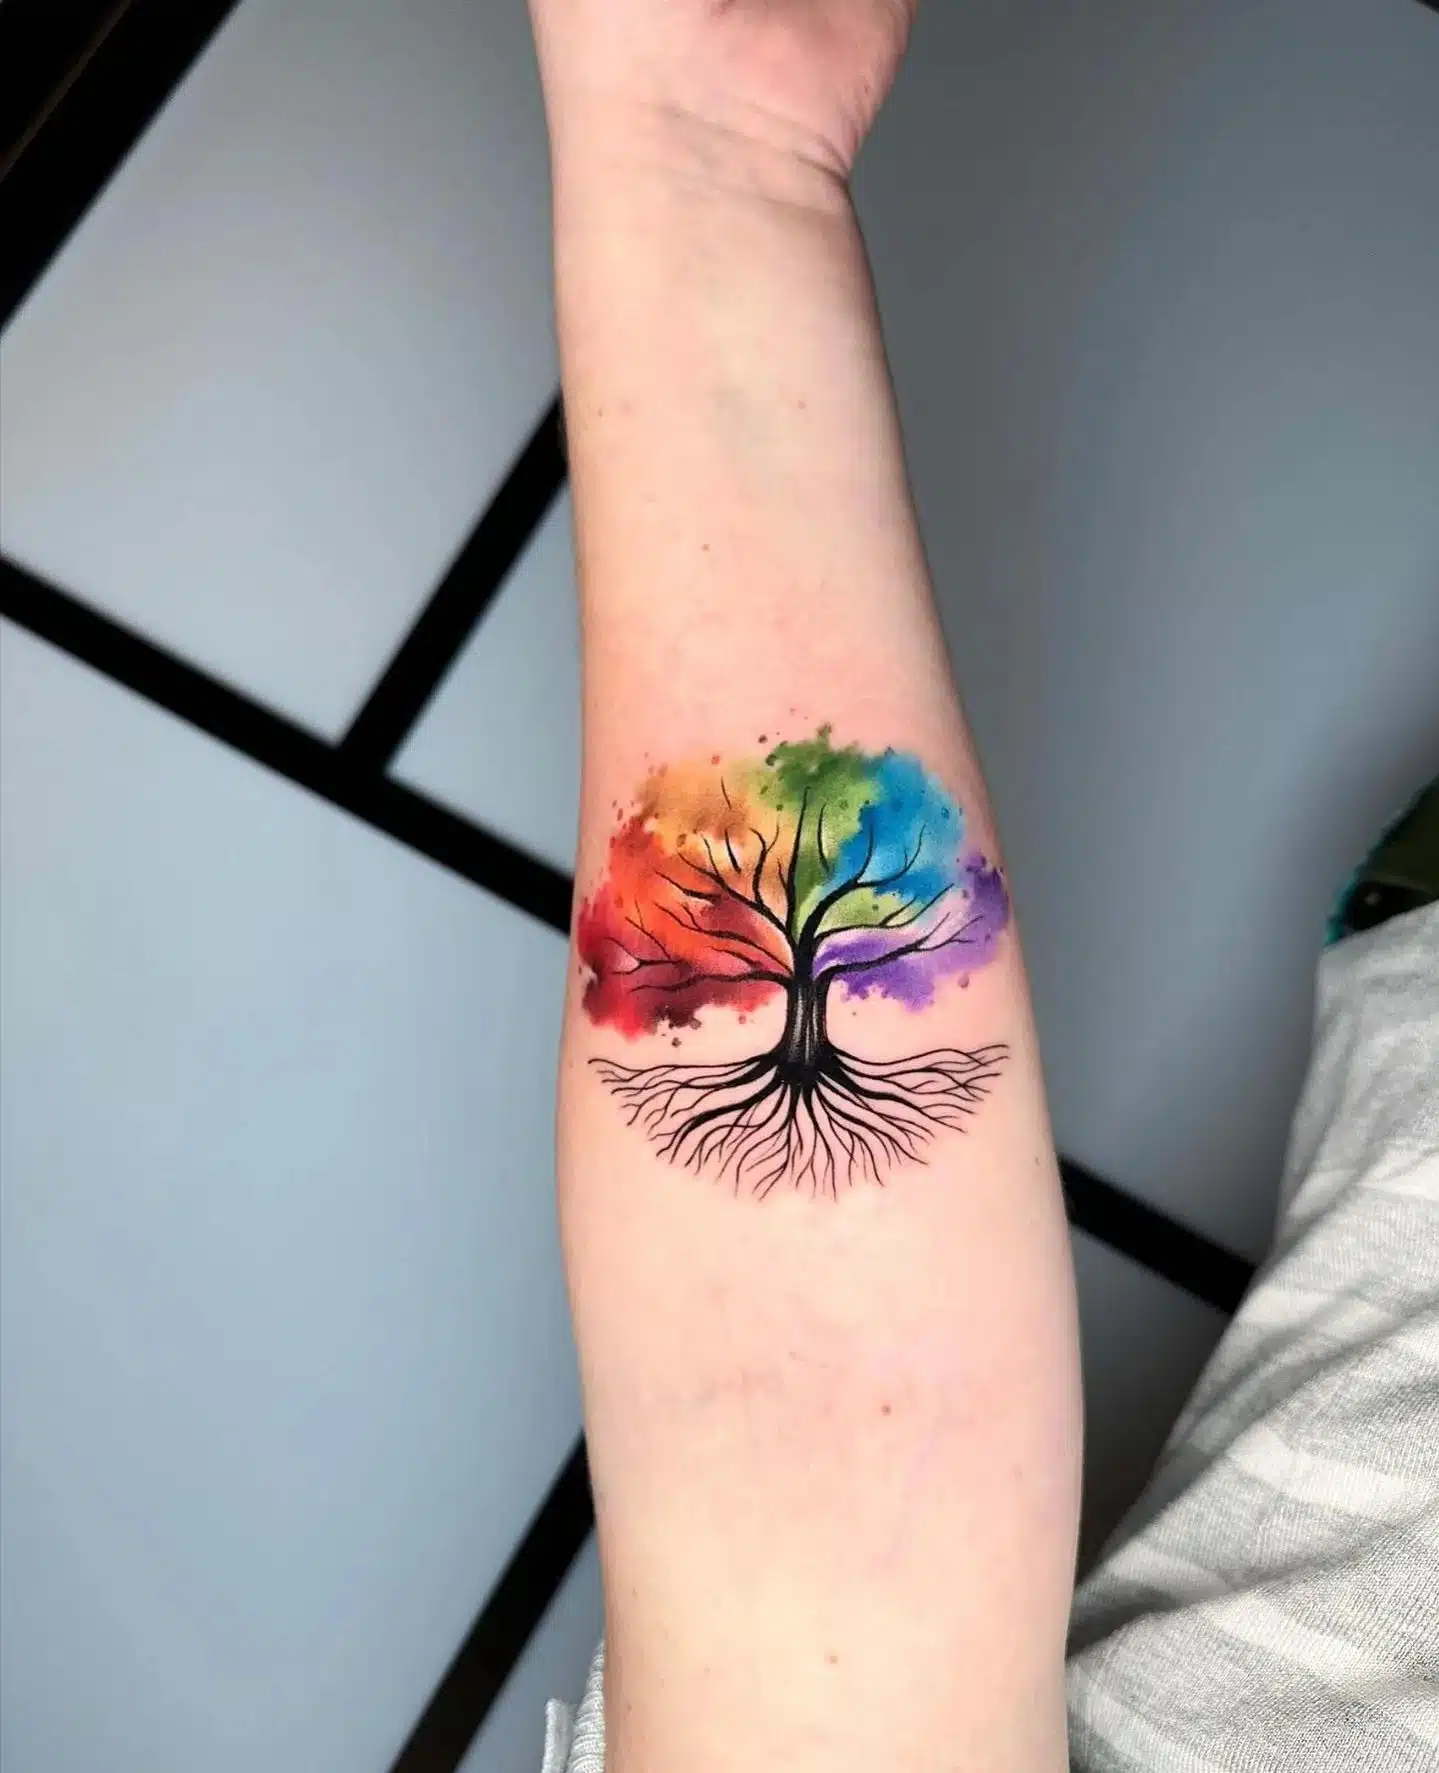 It is in the roots, not the branches, that a tree’s greatest strength lies.
Thanks so much for coming Kirsty, was fab having you in the studio!
Tattoo by Noemi! ❤️
noemi_tattoo 

Done using:
dragonhawkofficial
worldfamousink unigloves 

Supplies by our sponsors:
magnumtattoosupplies.uk                     totaltattoo